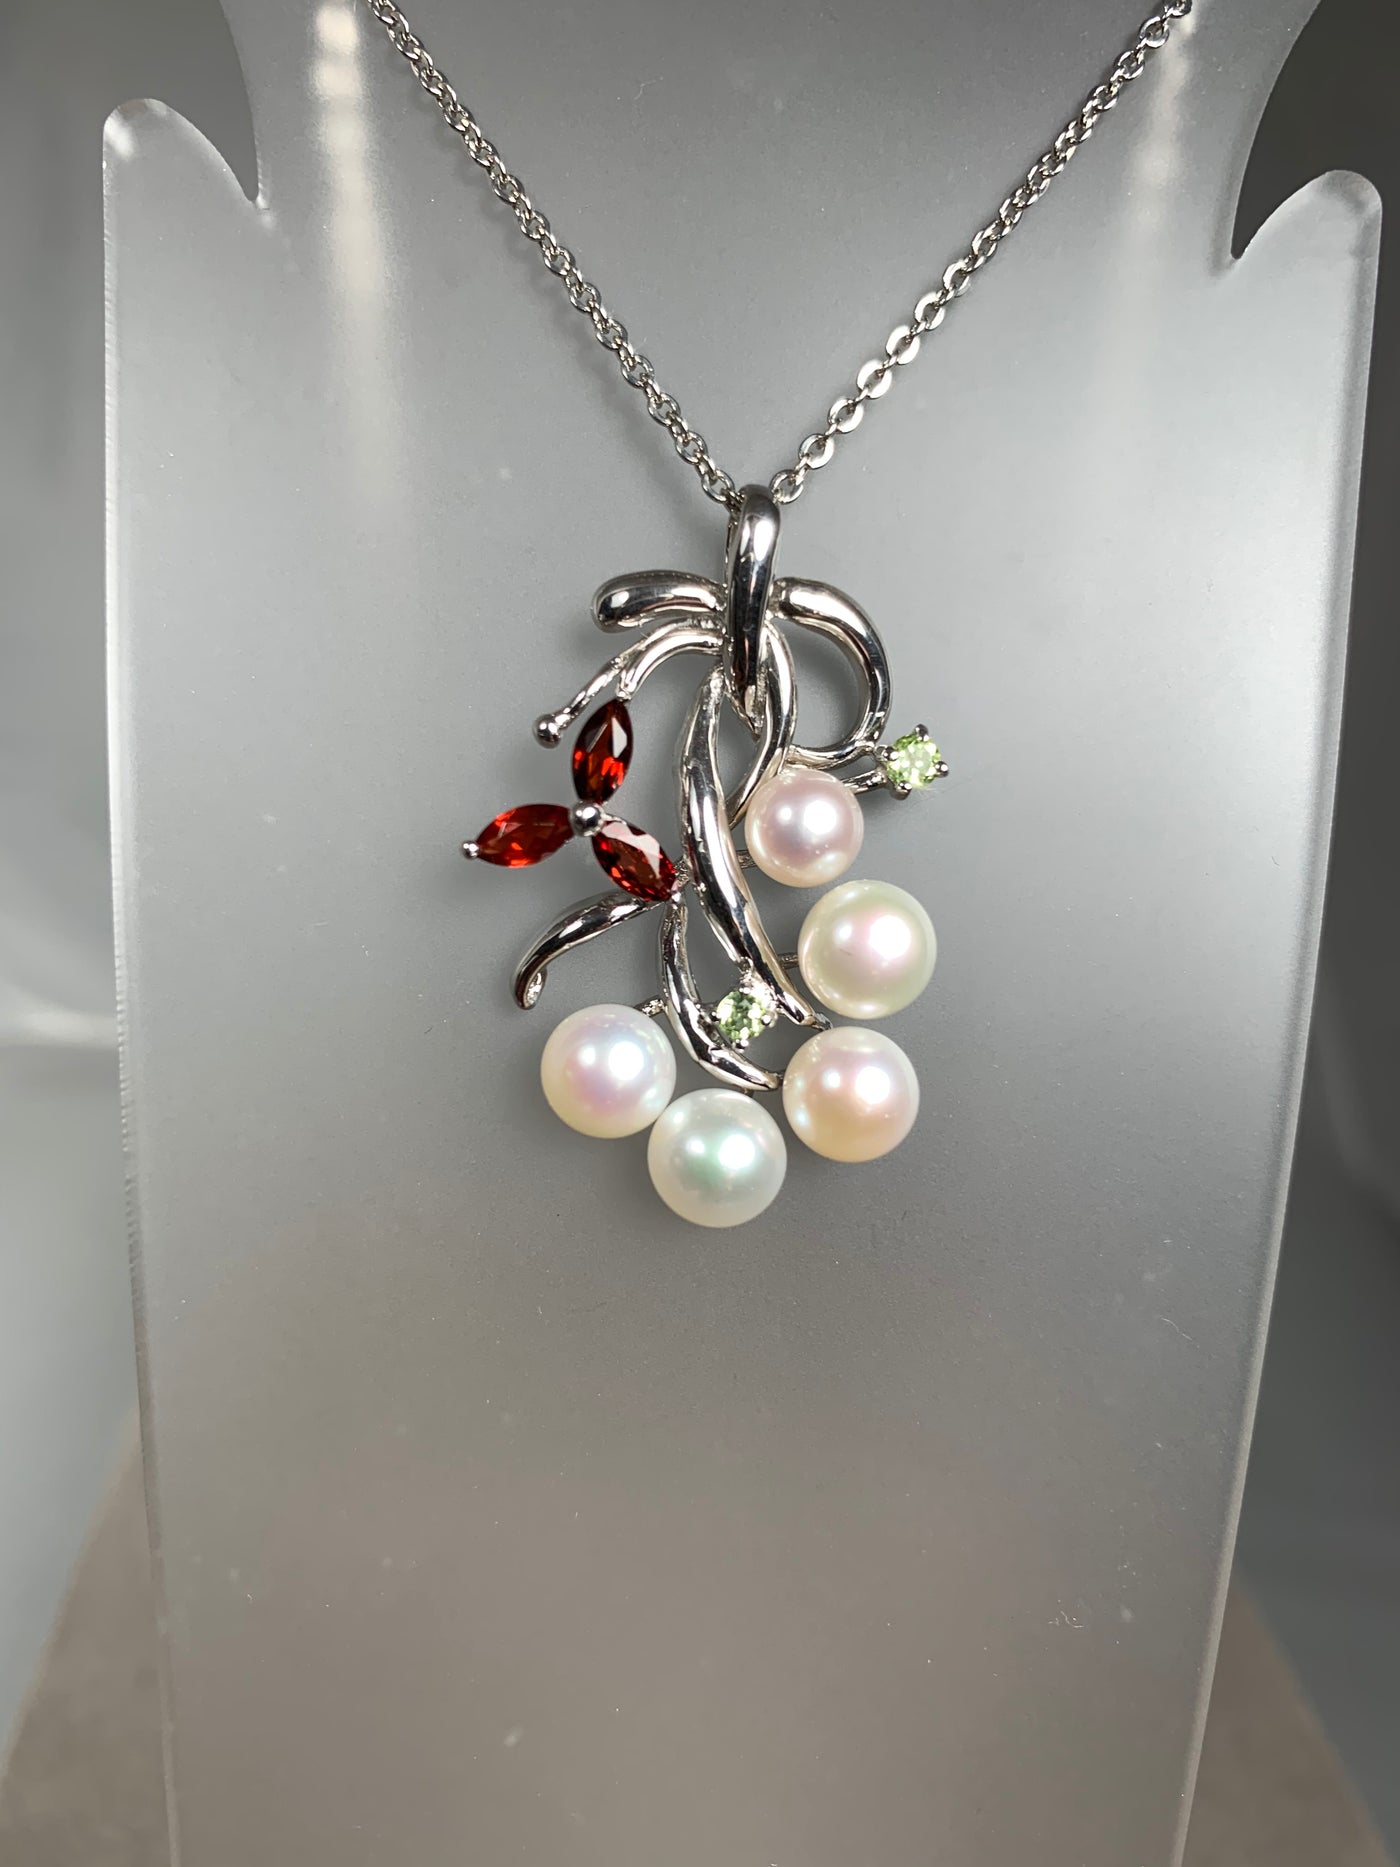 Genuine Pearls Firework Shower Pendant with Garnet & Peridot Accent in Silver